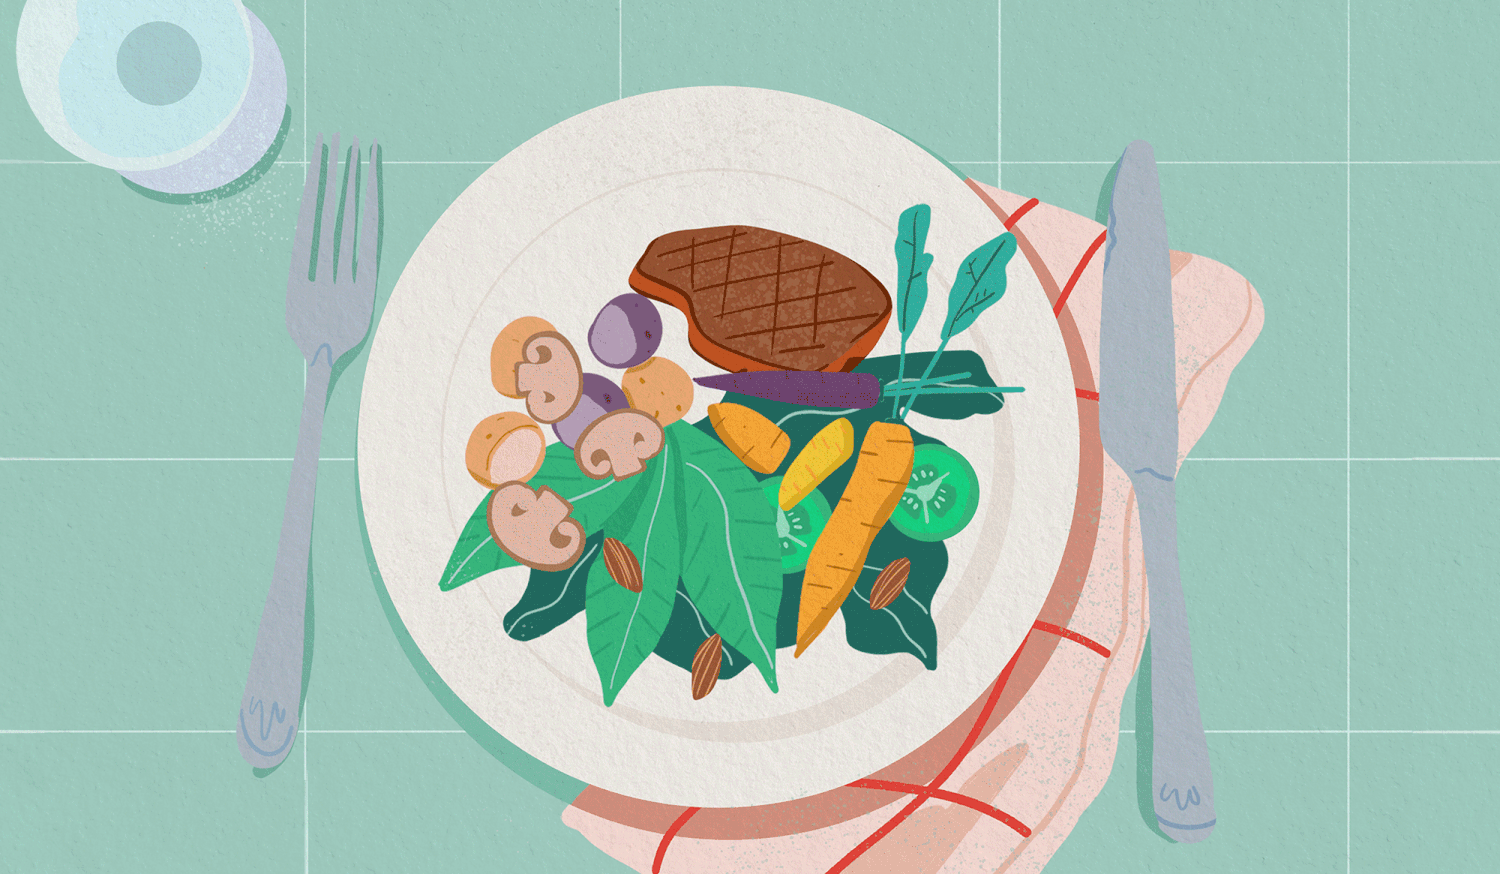 How to Eat Like a Climatarian: dinner plate shrinks with less beef